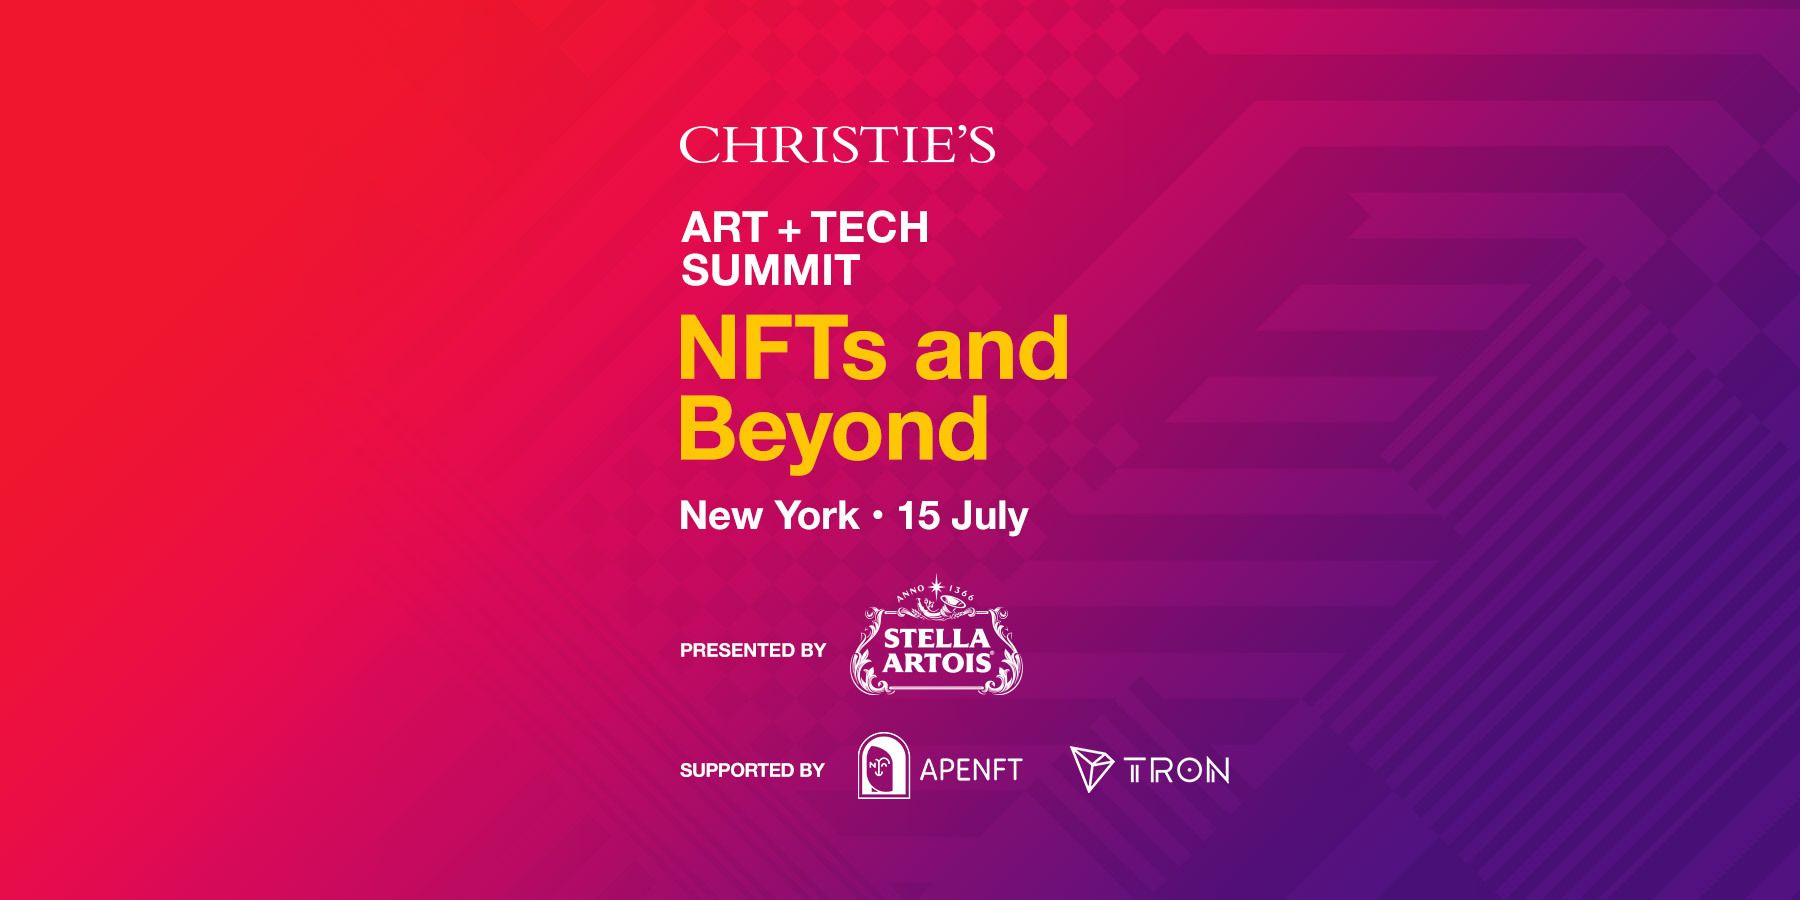 Christie’s Art + Tech Summit: NFTs and Beyond